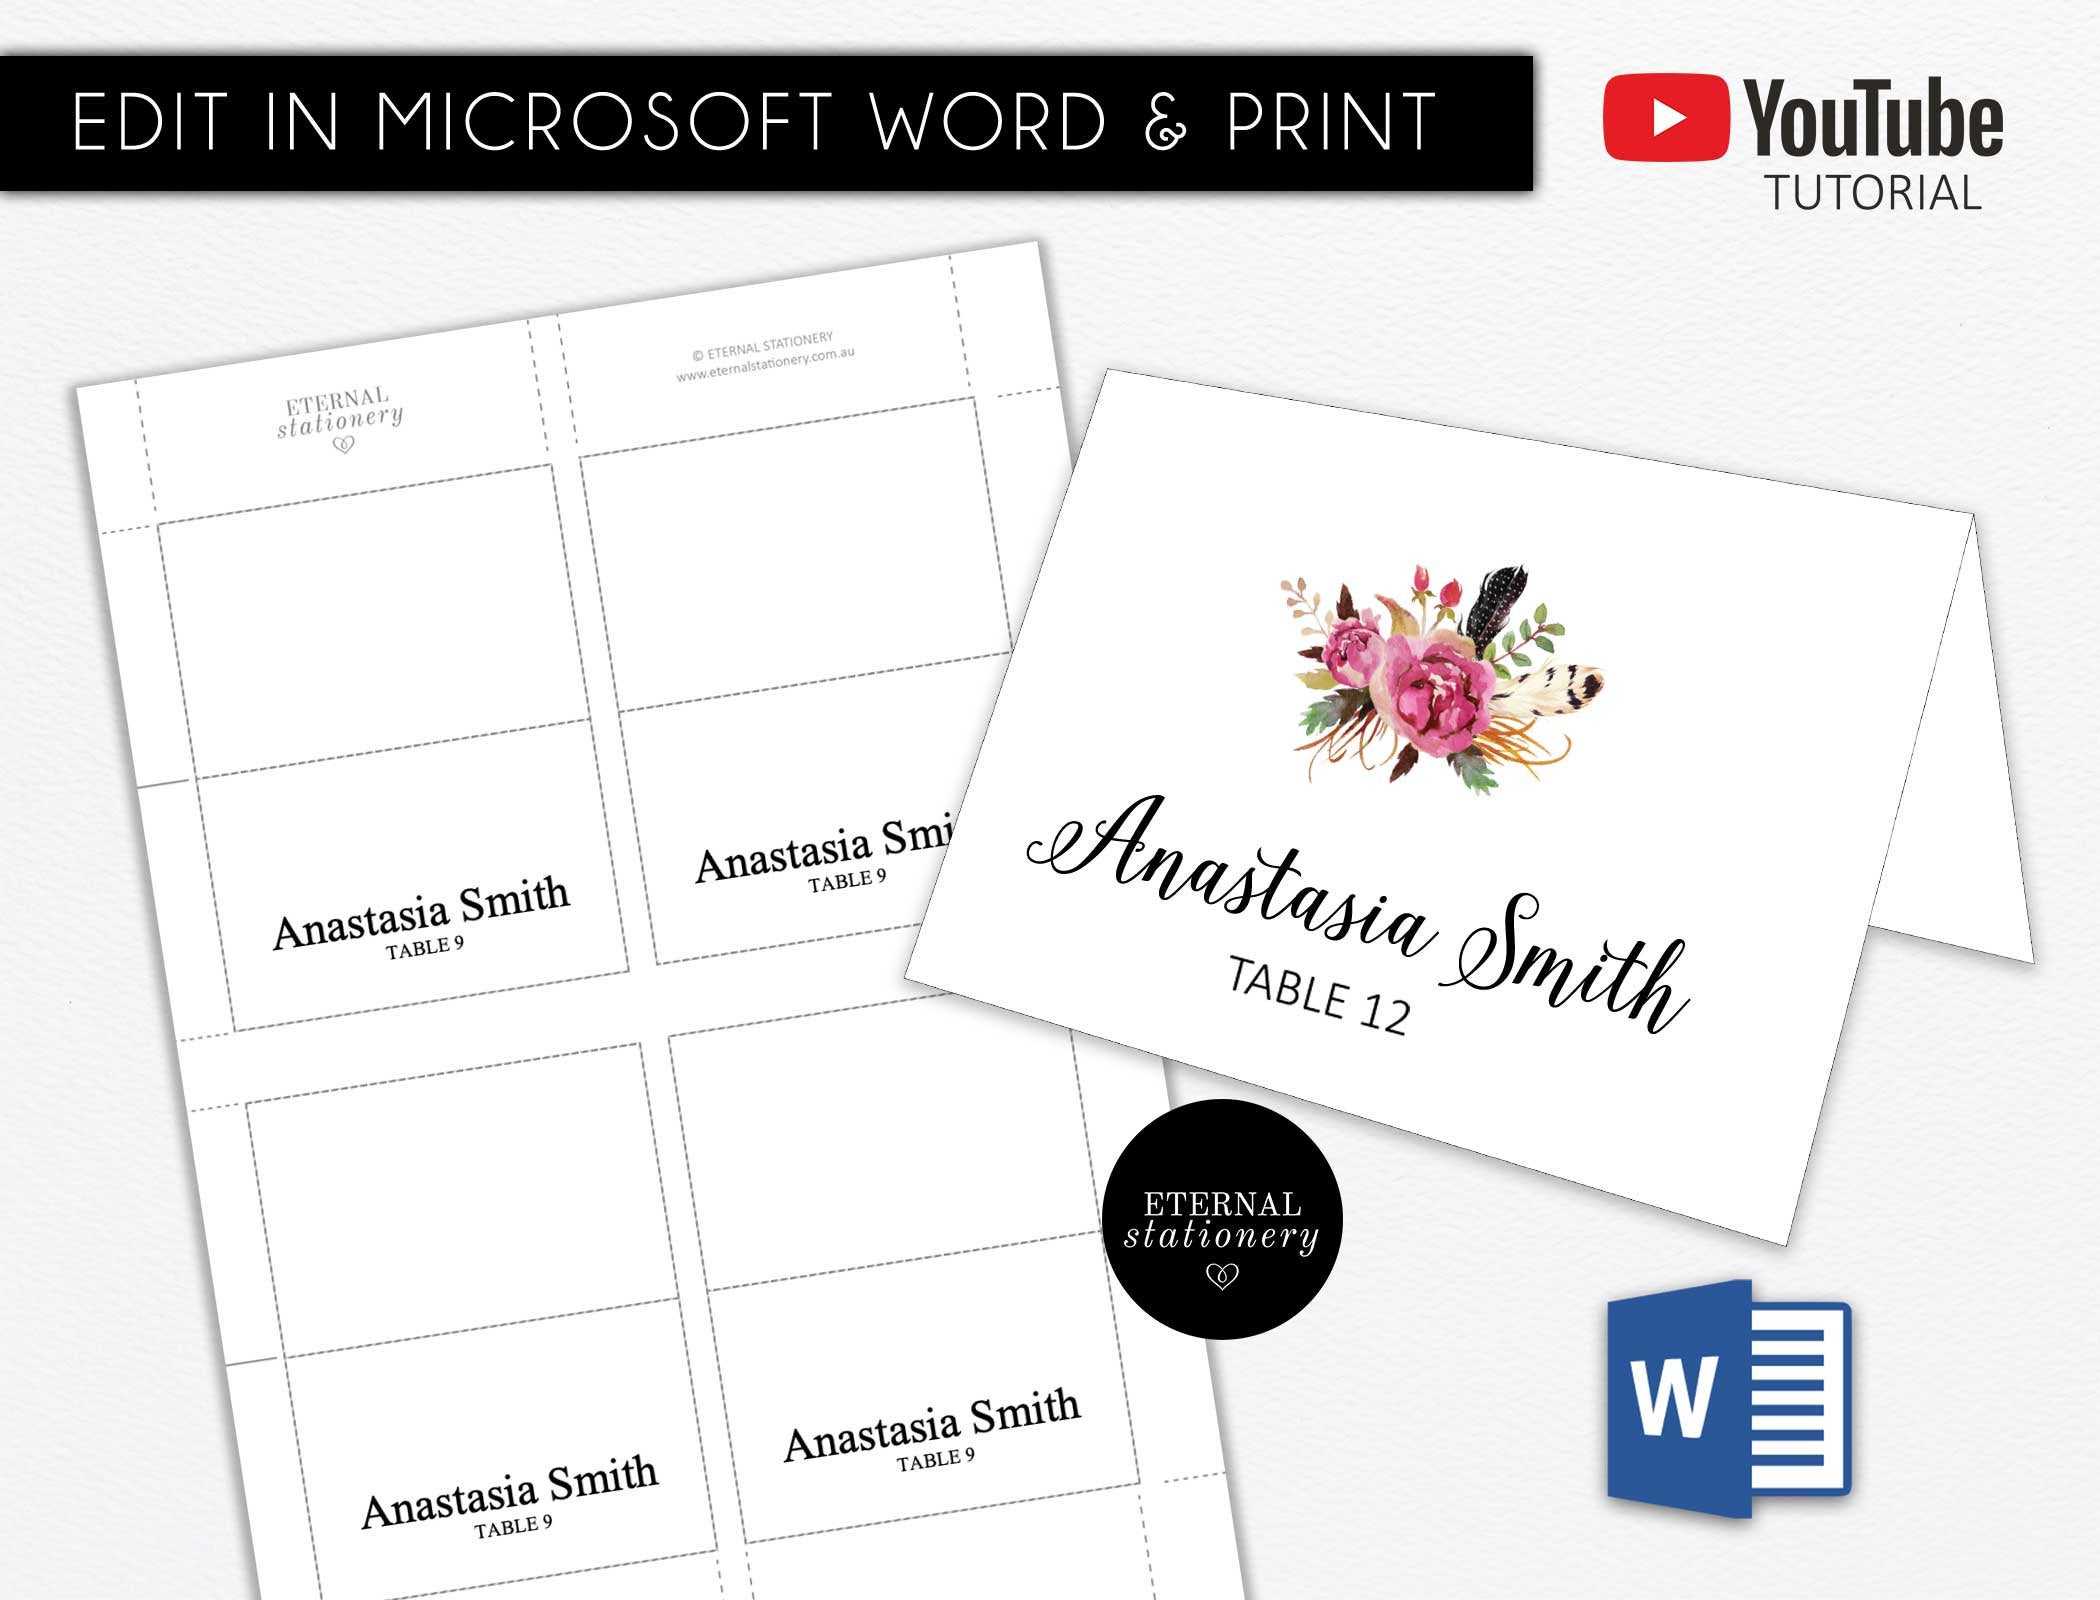 Diy Editable Microsoft Word Place Card Template, Wedding Place Card, Tent  Card, Engagement, Corporate Place Card, Escort Card, Pc 01 Intended For Ms Word Place Card Template